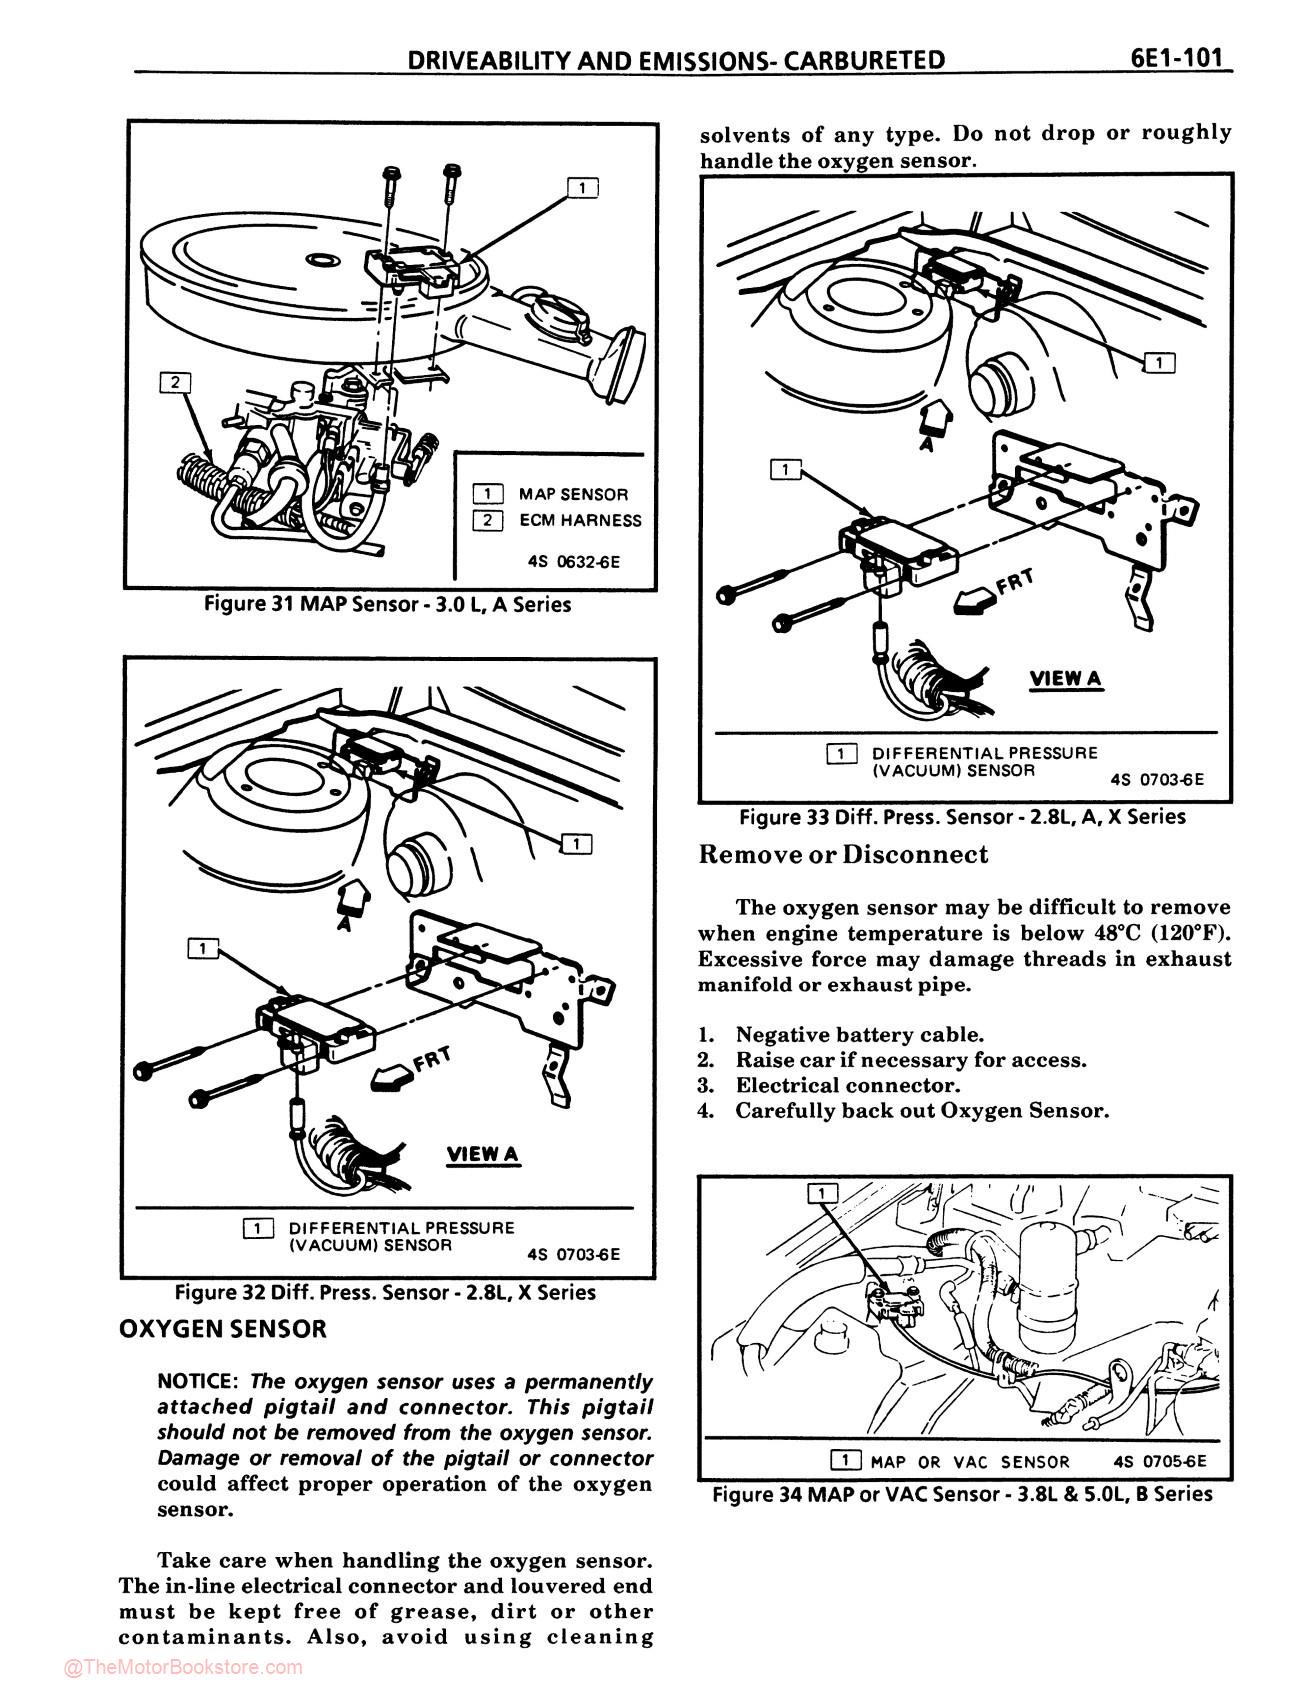 1985 Buick and Grand National Service Manual - Sample Page 3